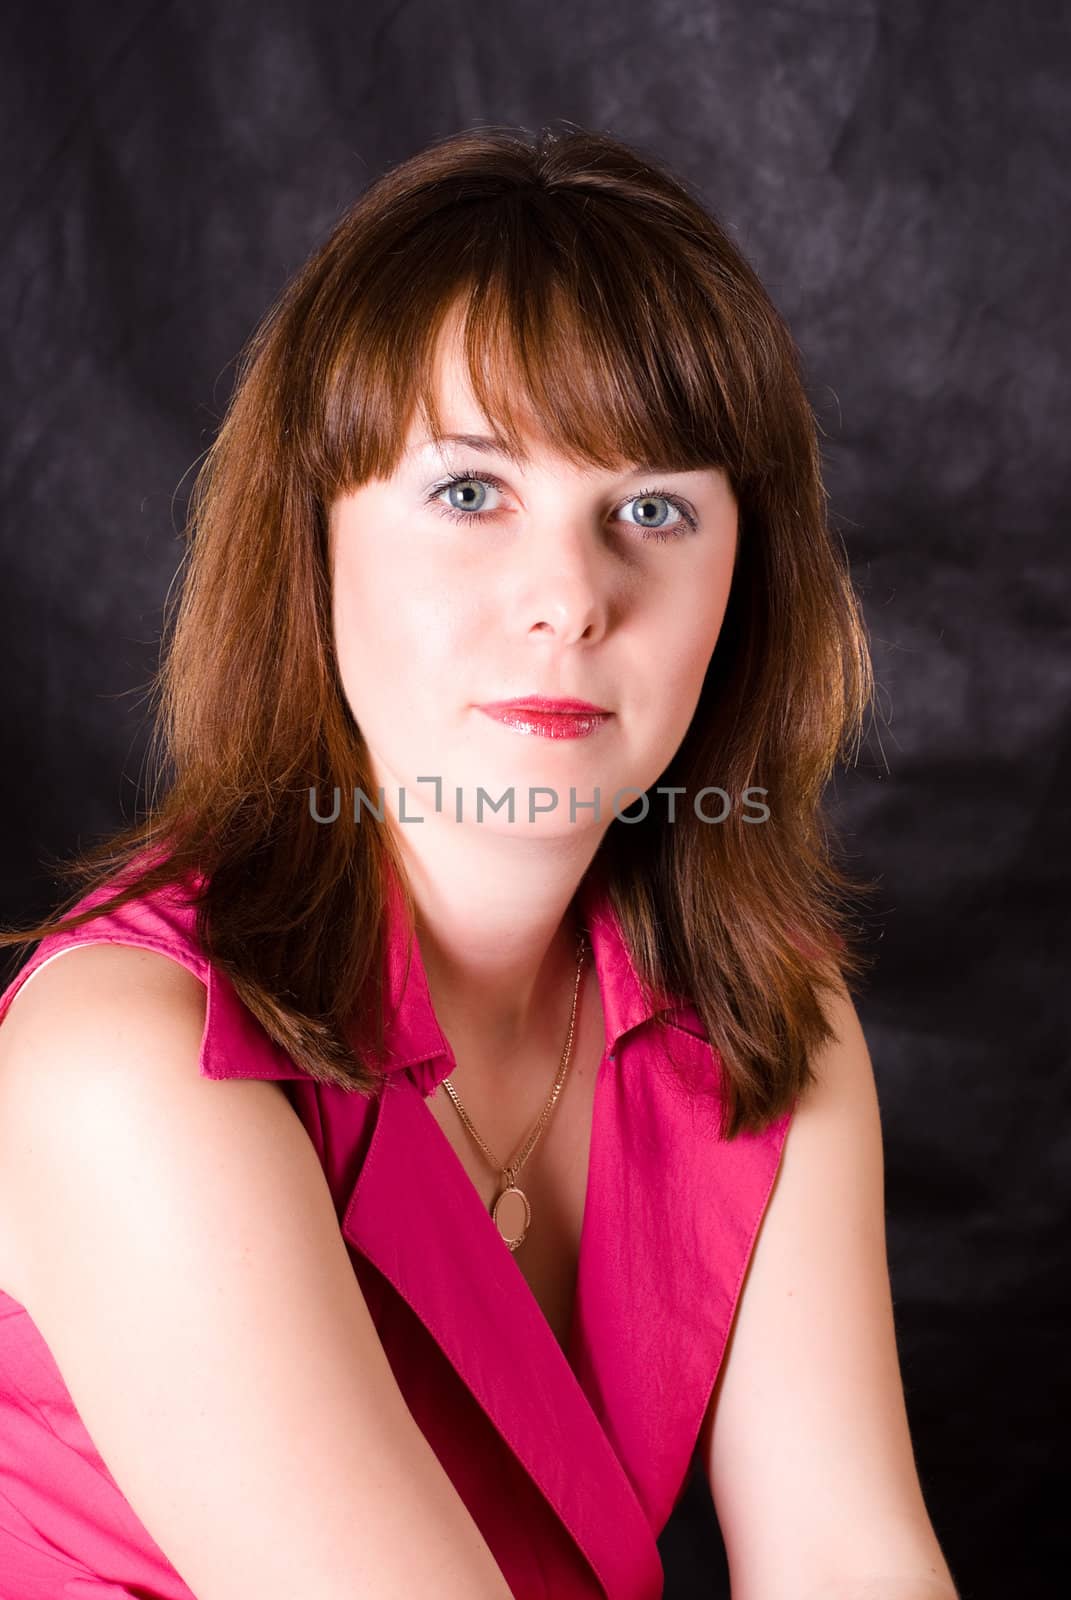 portrait of beautiful girl with brown hair and grey eyes on dark background